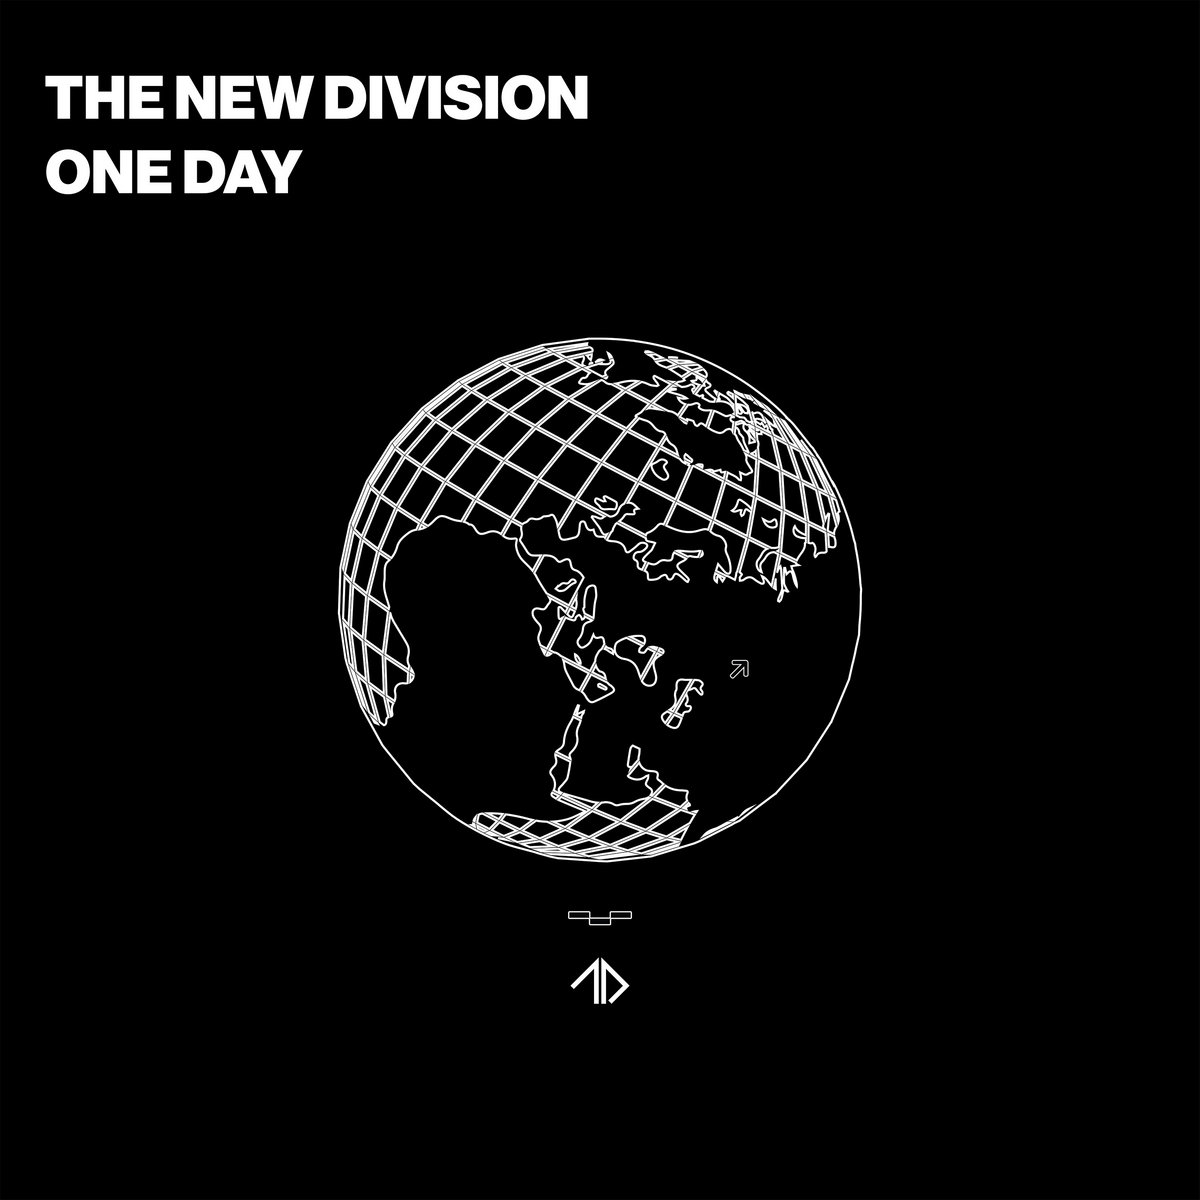 HOT TRACK: “One Day” by The New Division